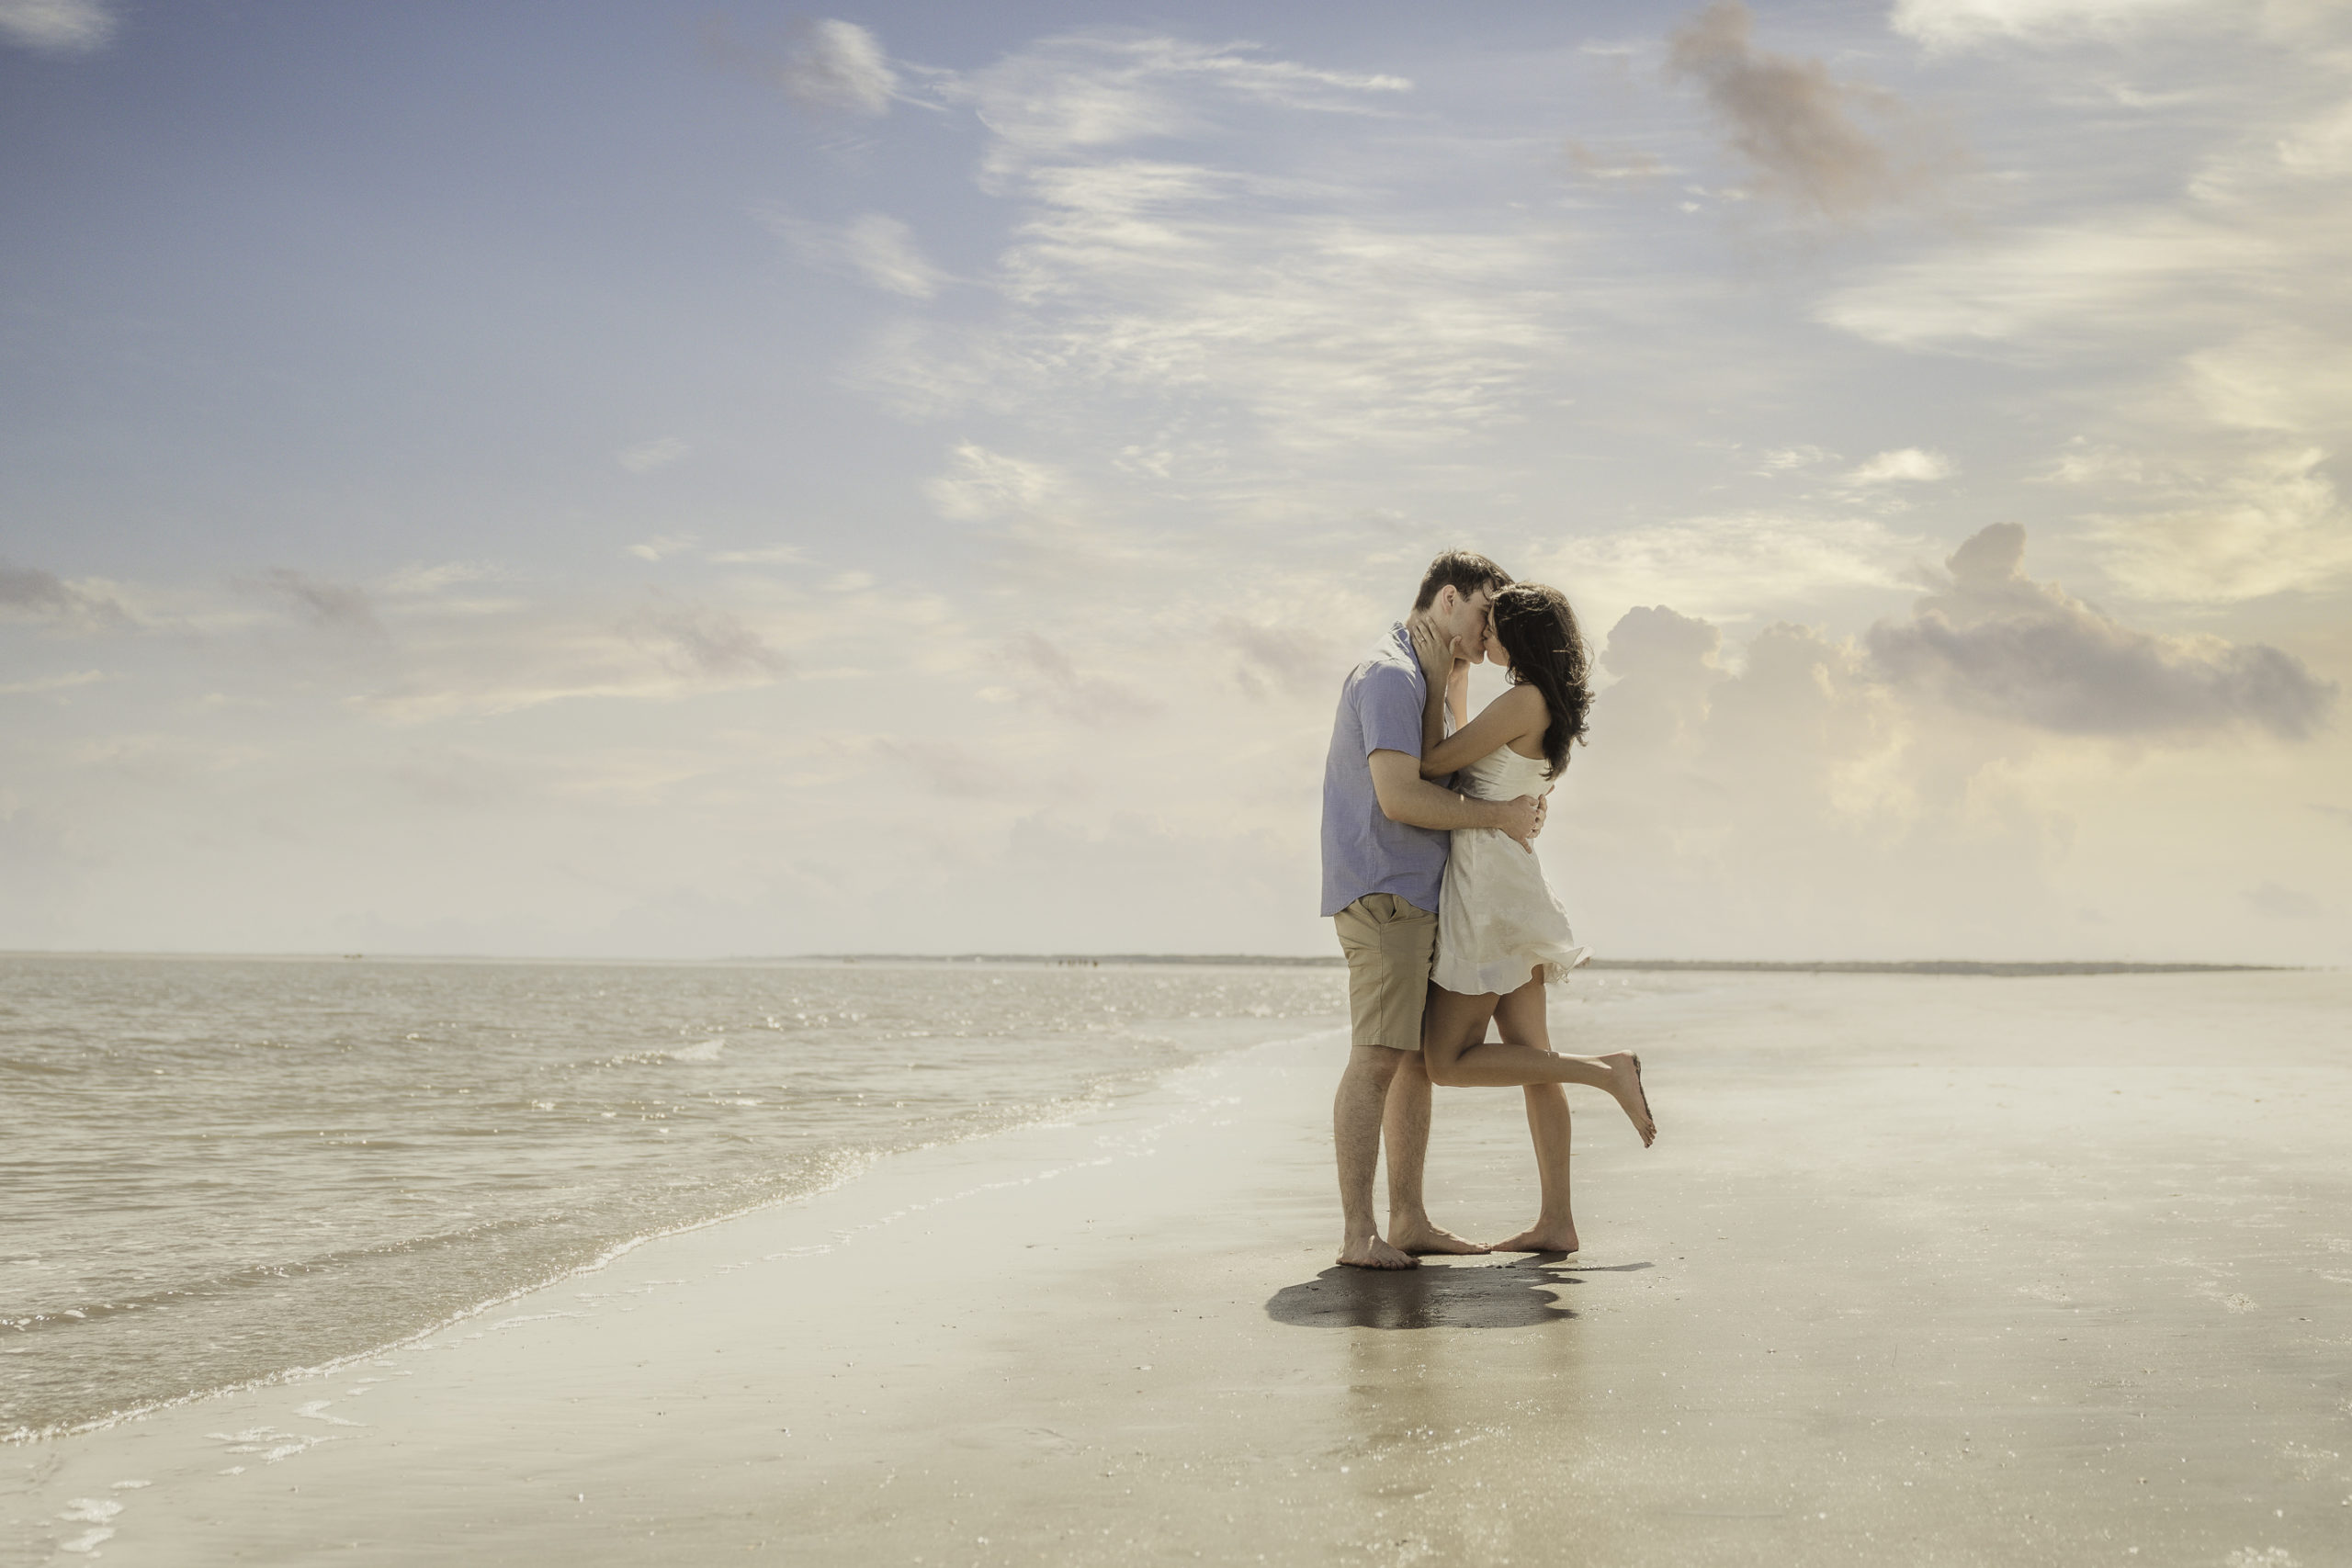 Wedding photographer in st simons island with an engagement session on east beach